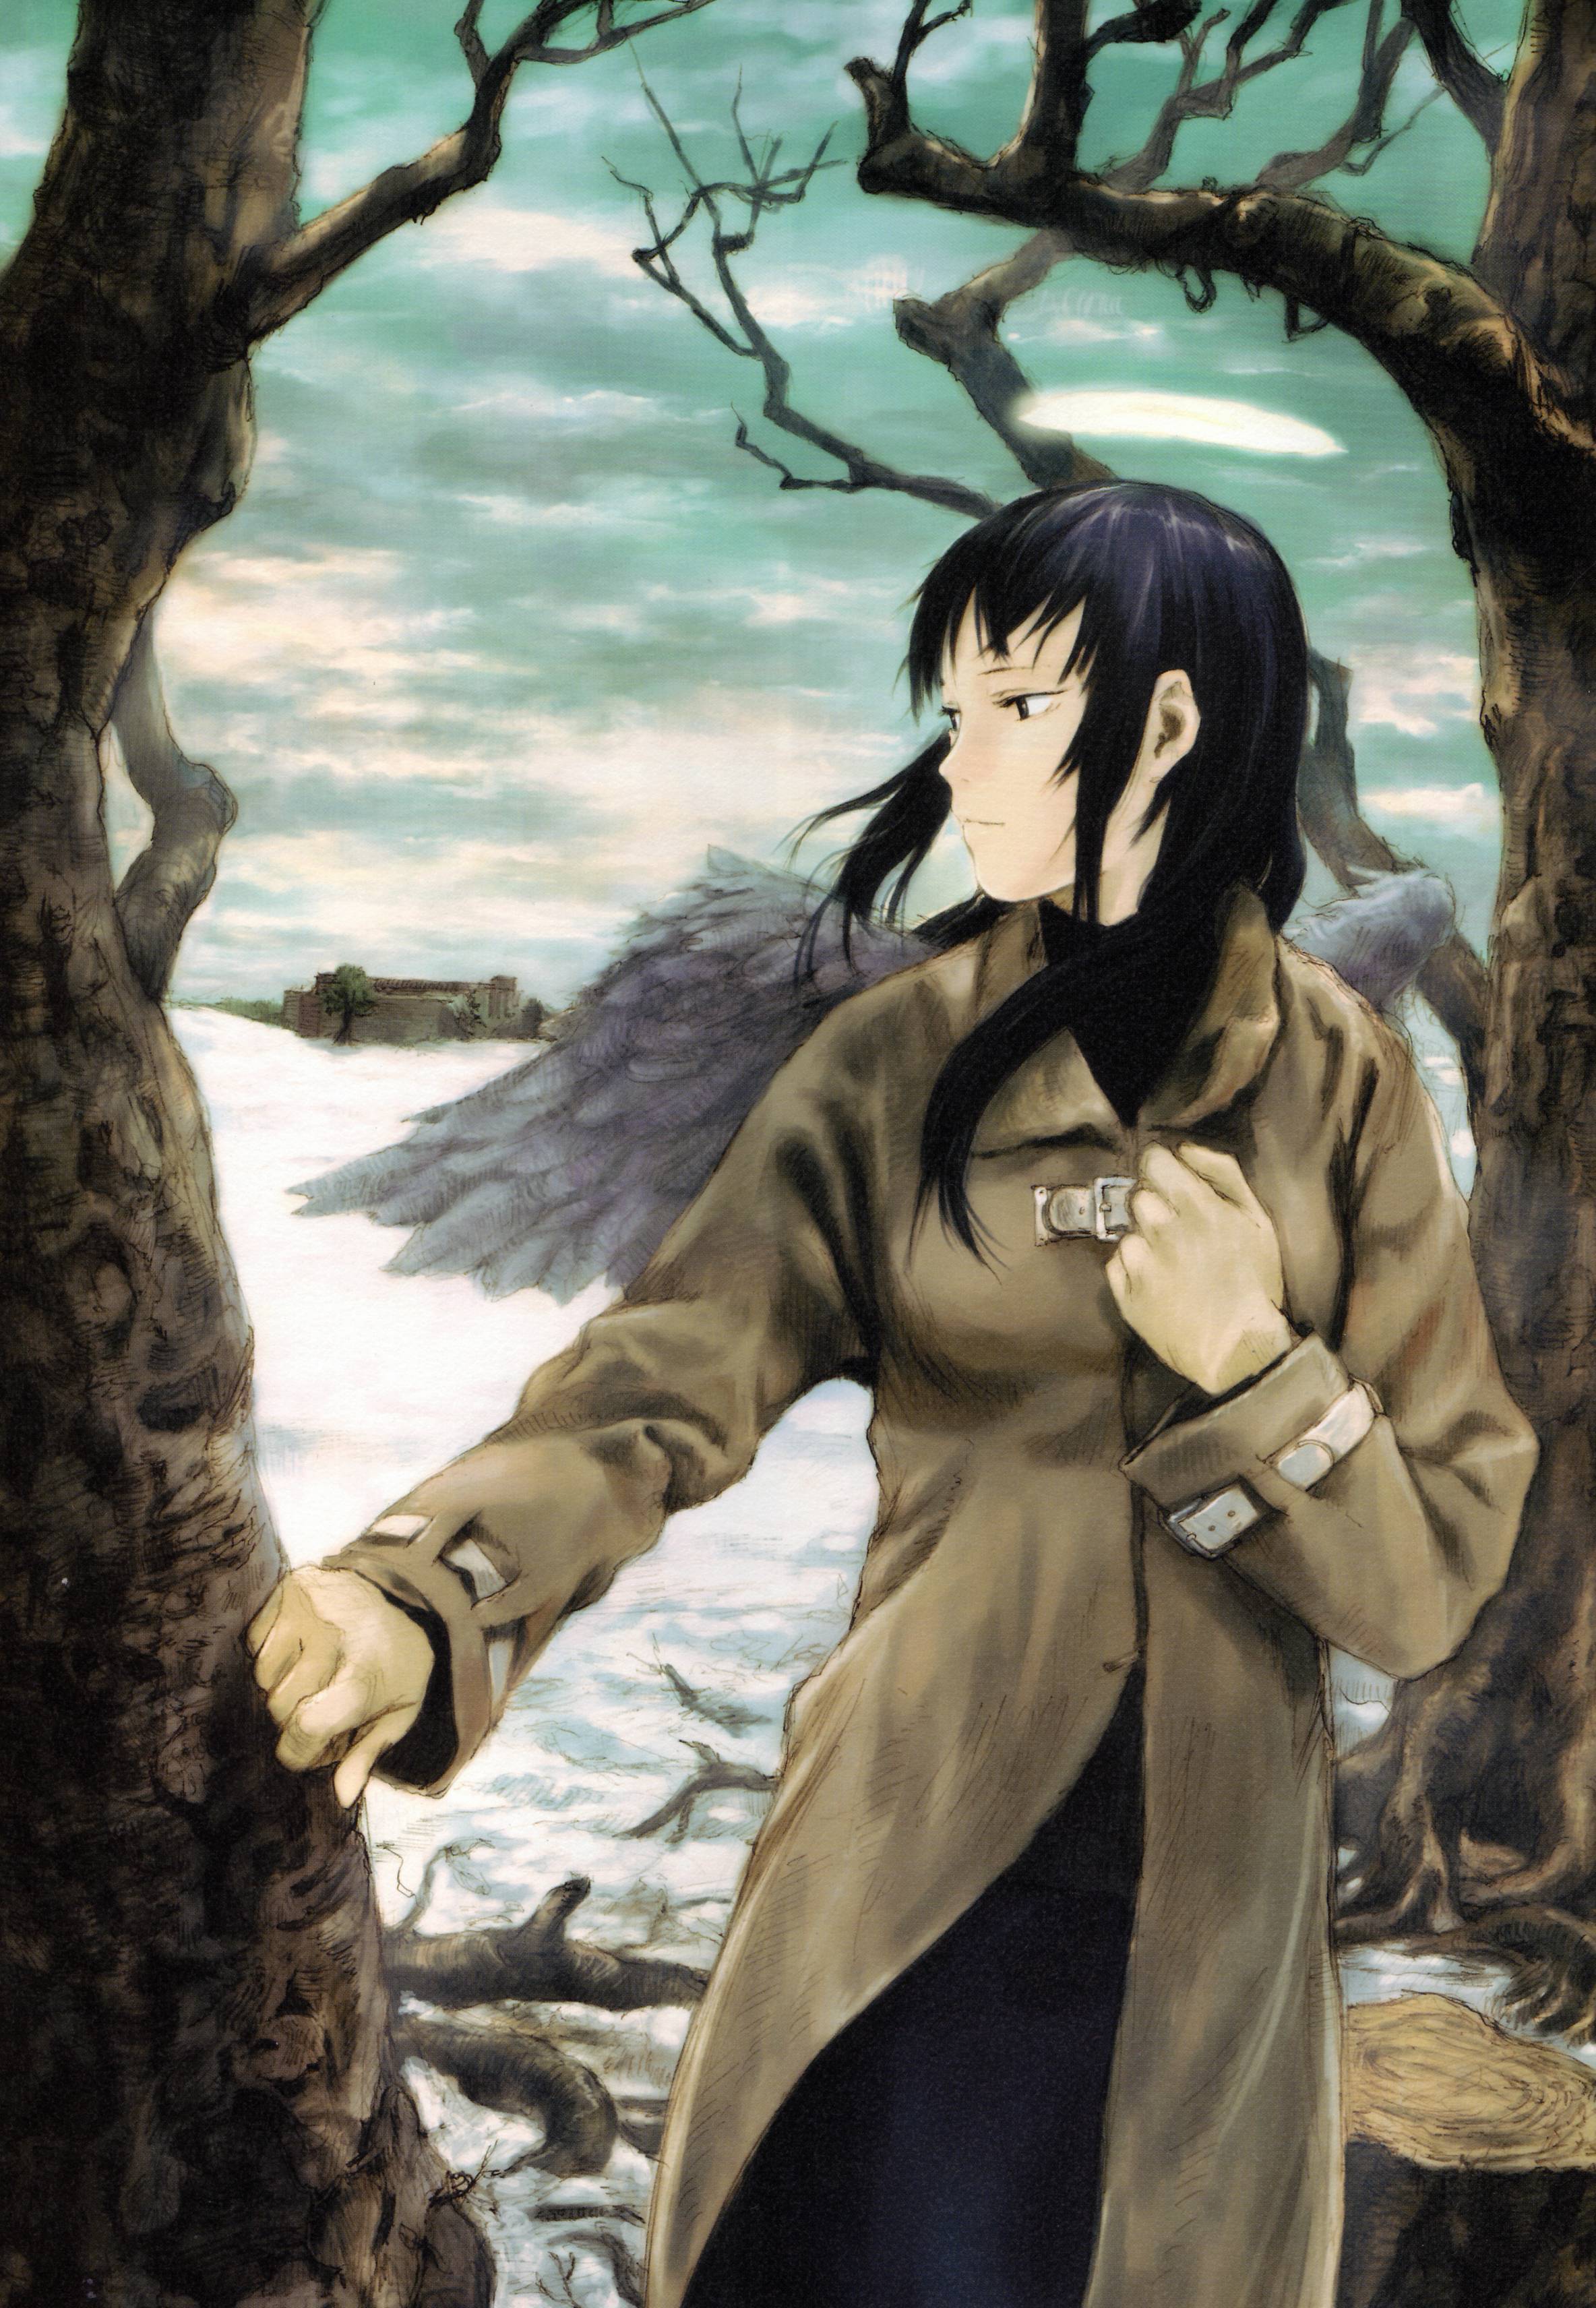 anime wallpapers Haibane Renmei